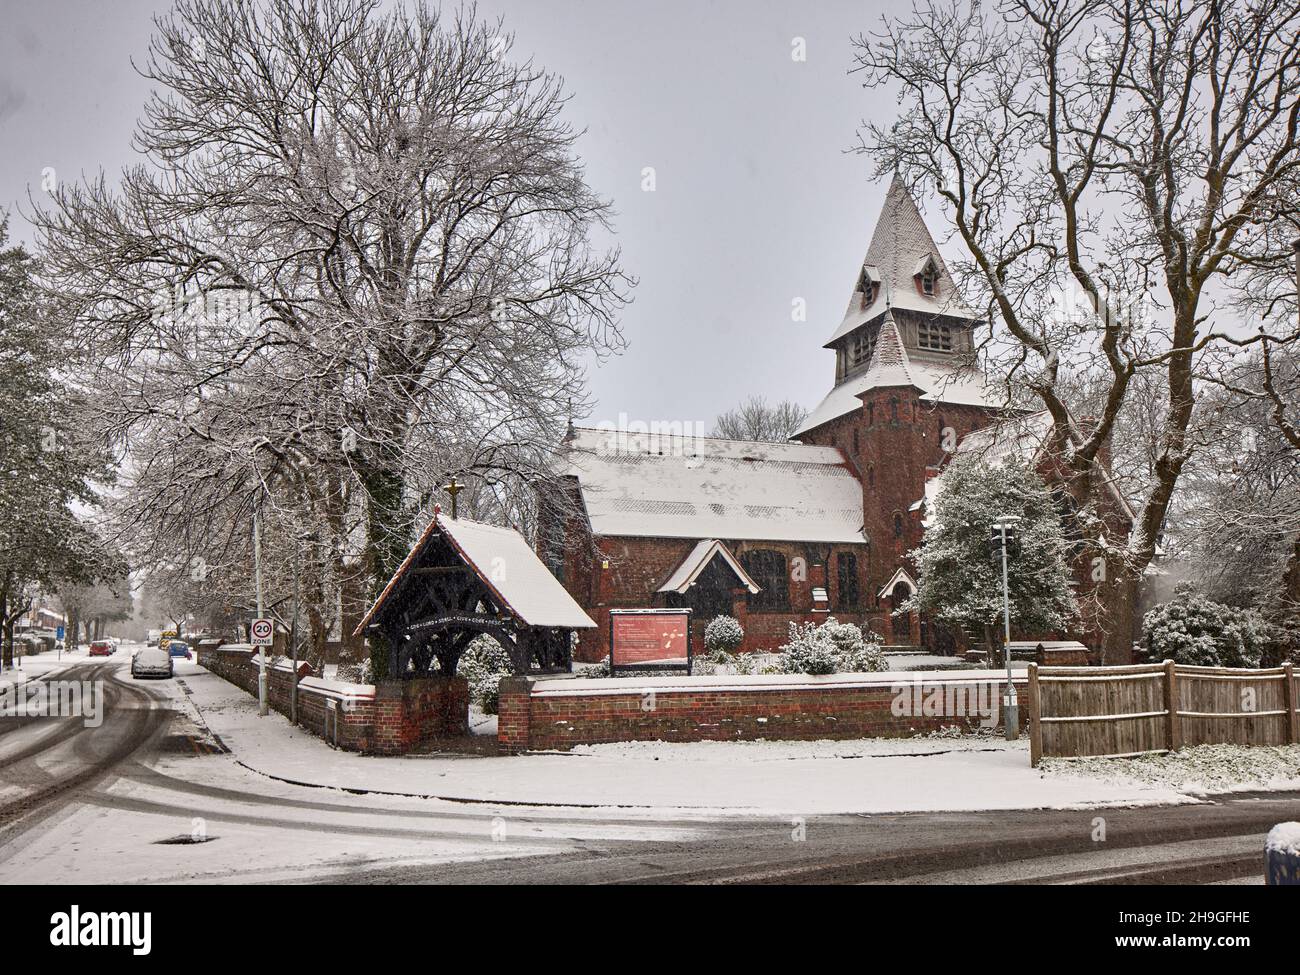 Winter Snow at Denton, Tameside. Grade 1 listed Gothic Revival style,  St Anne's Church Haughton designed by J. Medland Taylor Stock Photo